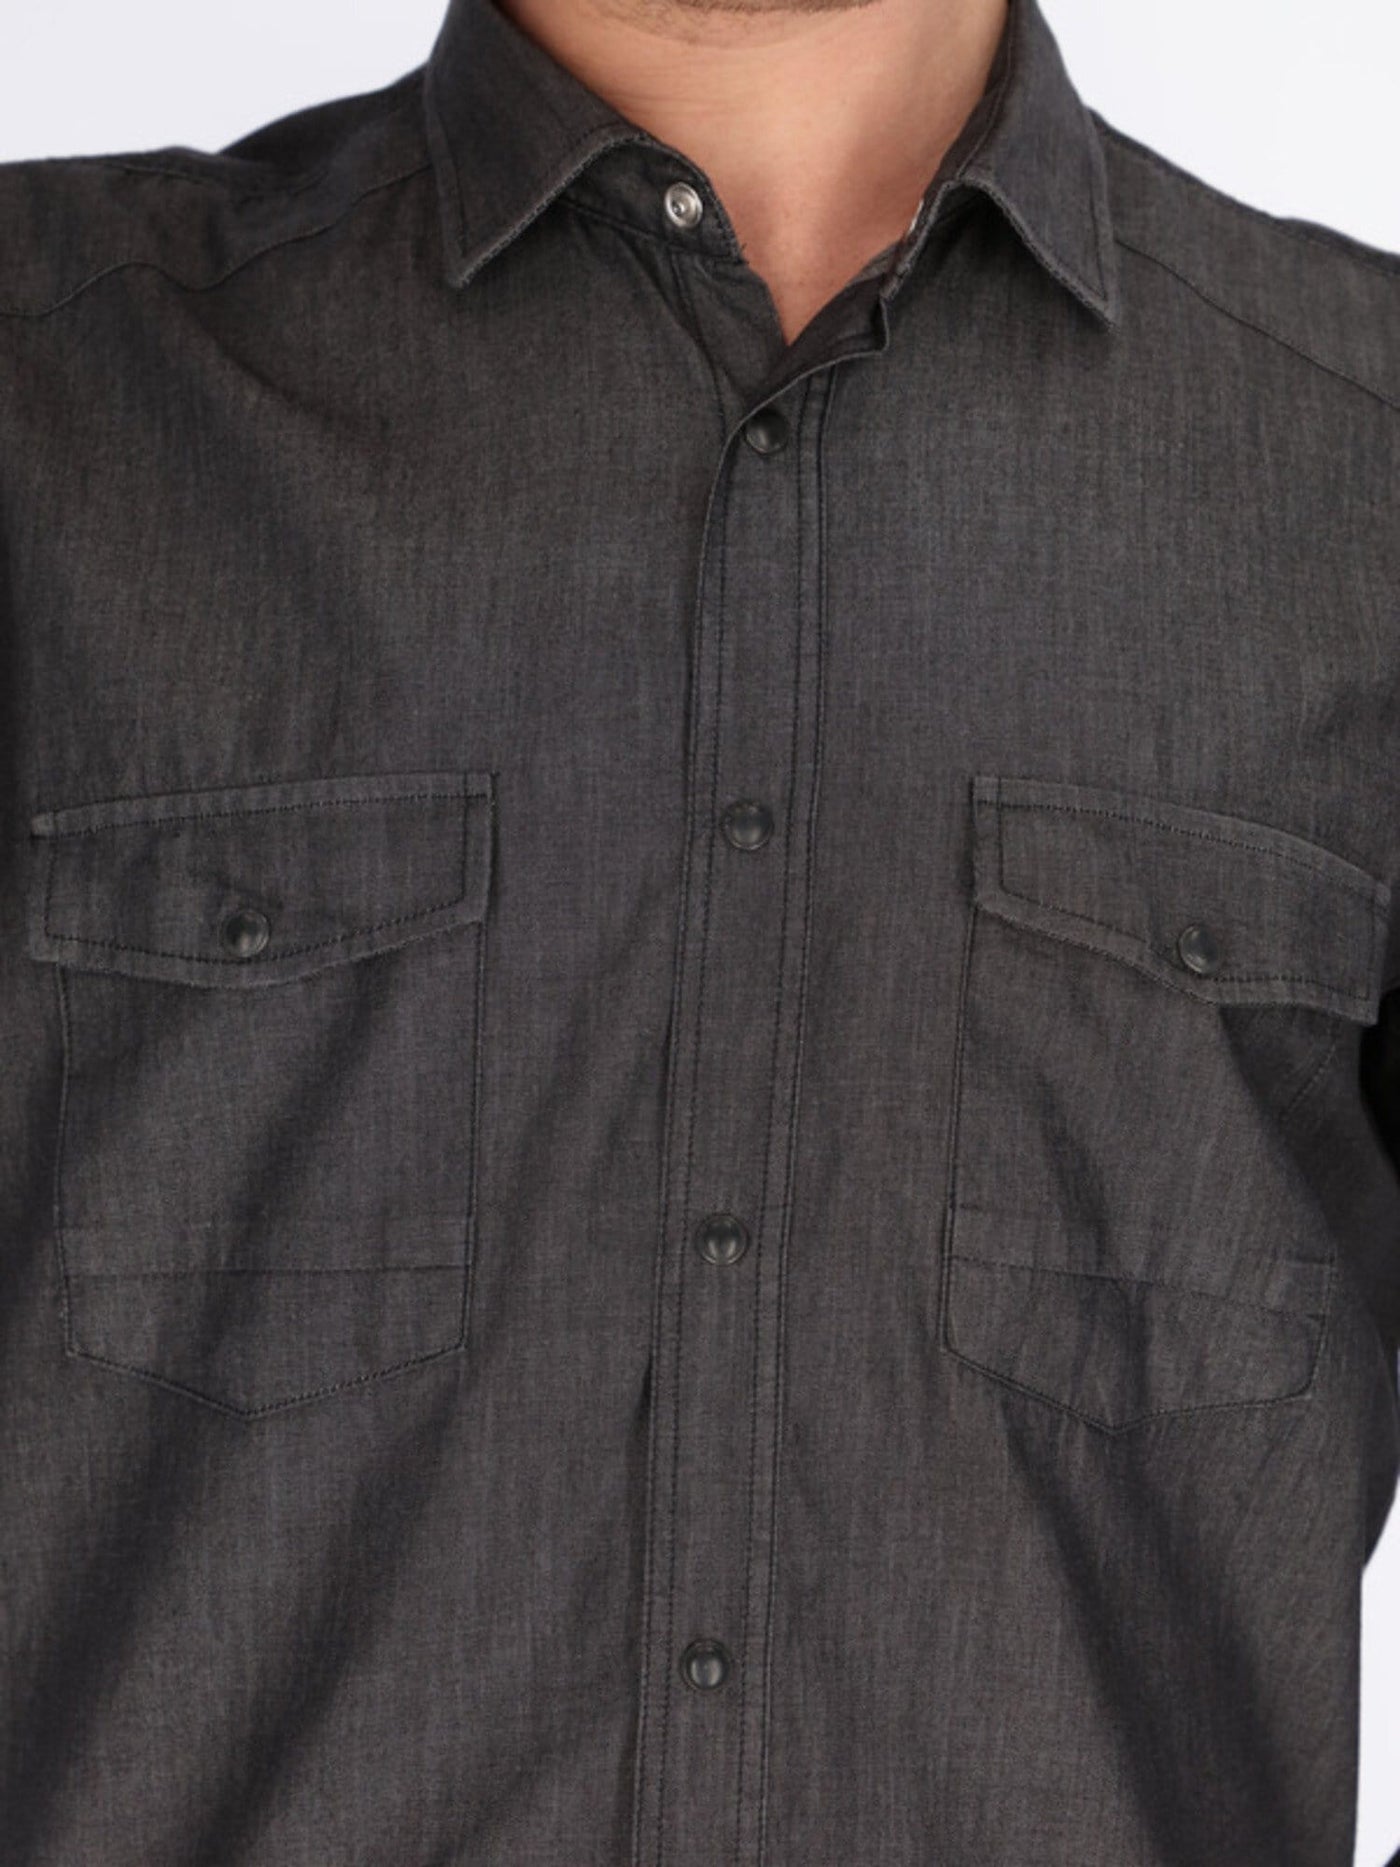 OR Shirts Long Sleeve Denim Shirt with Chest Pockets